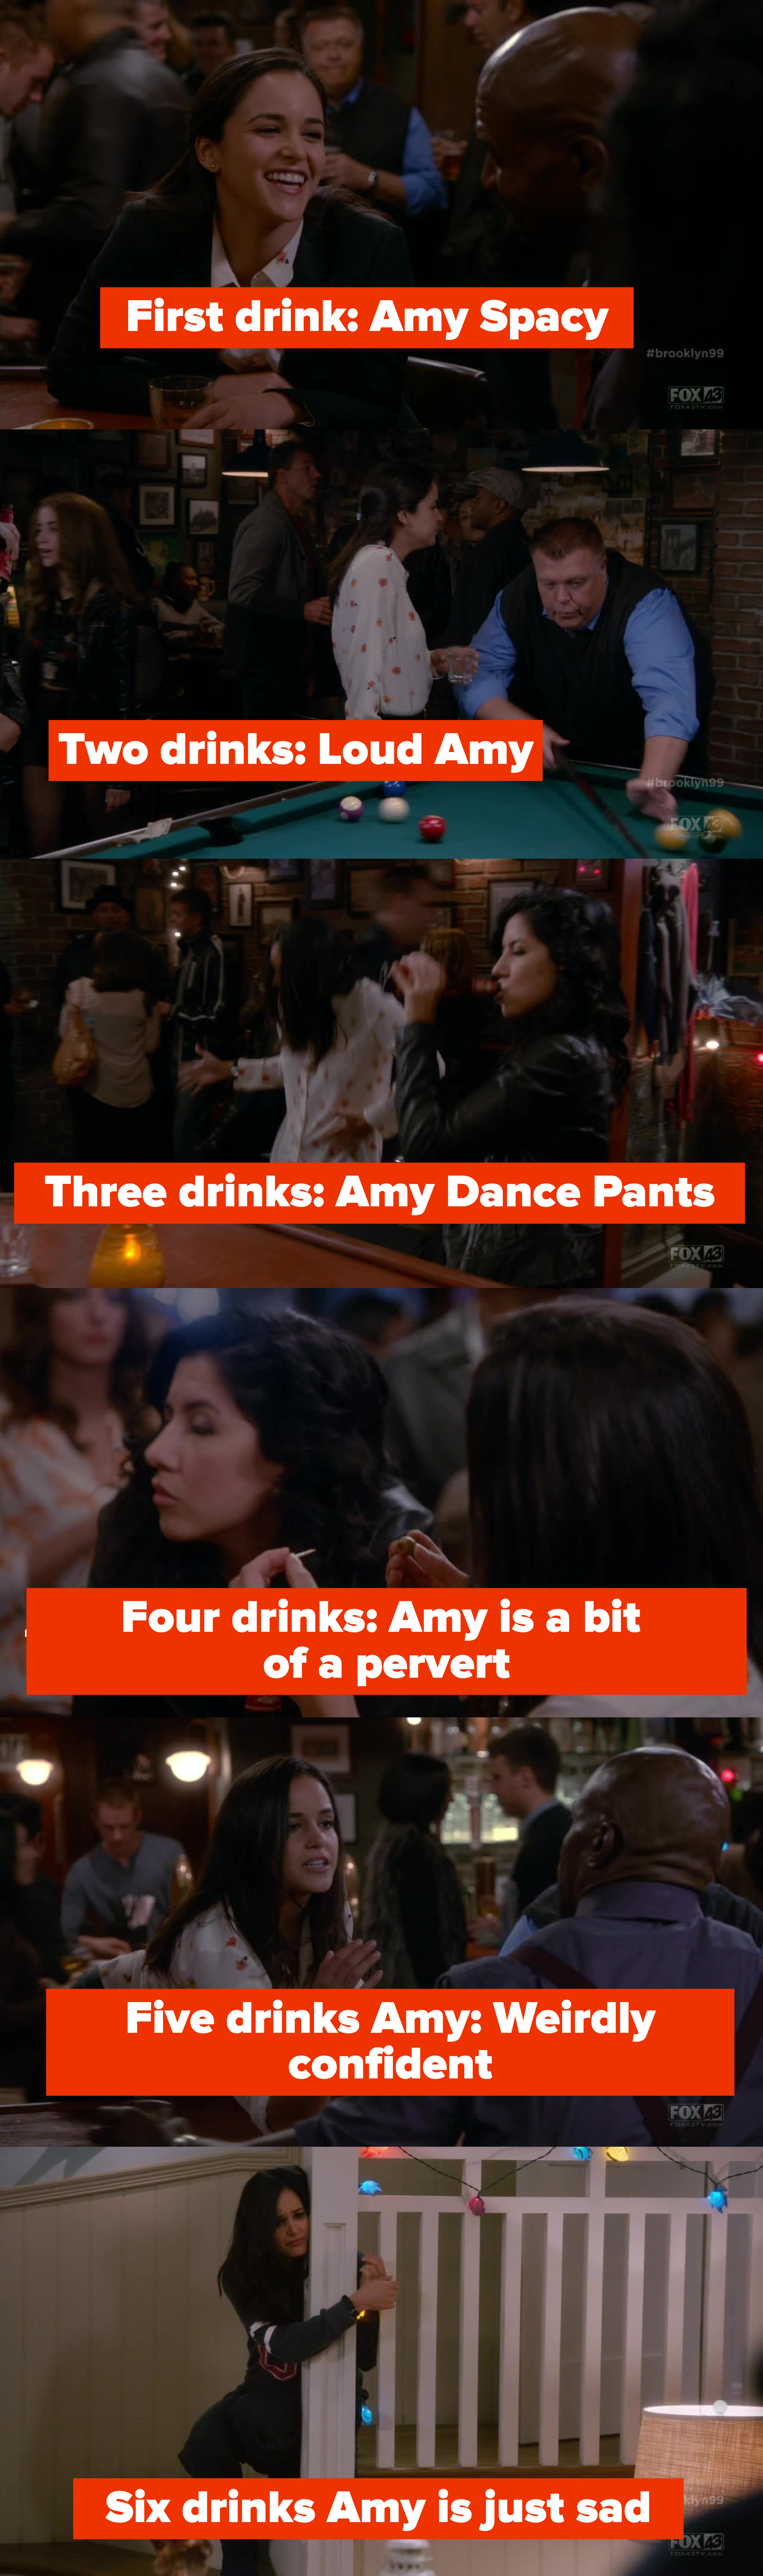 Gina: &quot;First drink is Amy Spacy, two drinks is Loud Amy, three drinks is Amy Dance Pants, four drinks is Amy is a bit of a pervert, five drinks is weirdly confident, and six drinks is Amy is just sad&quot;